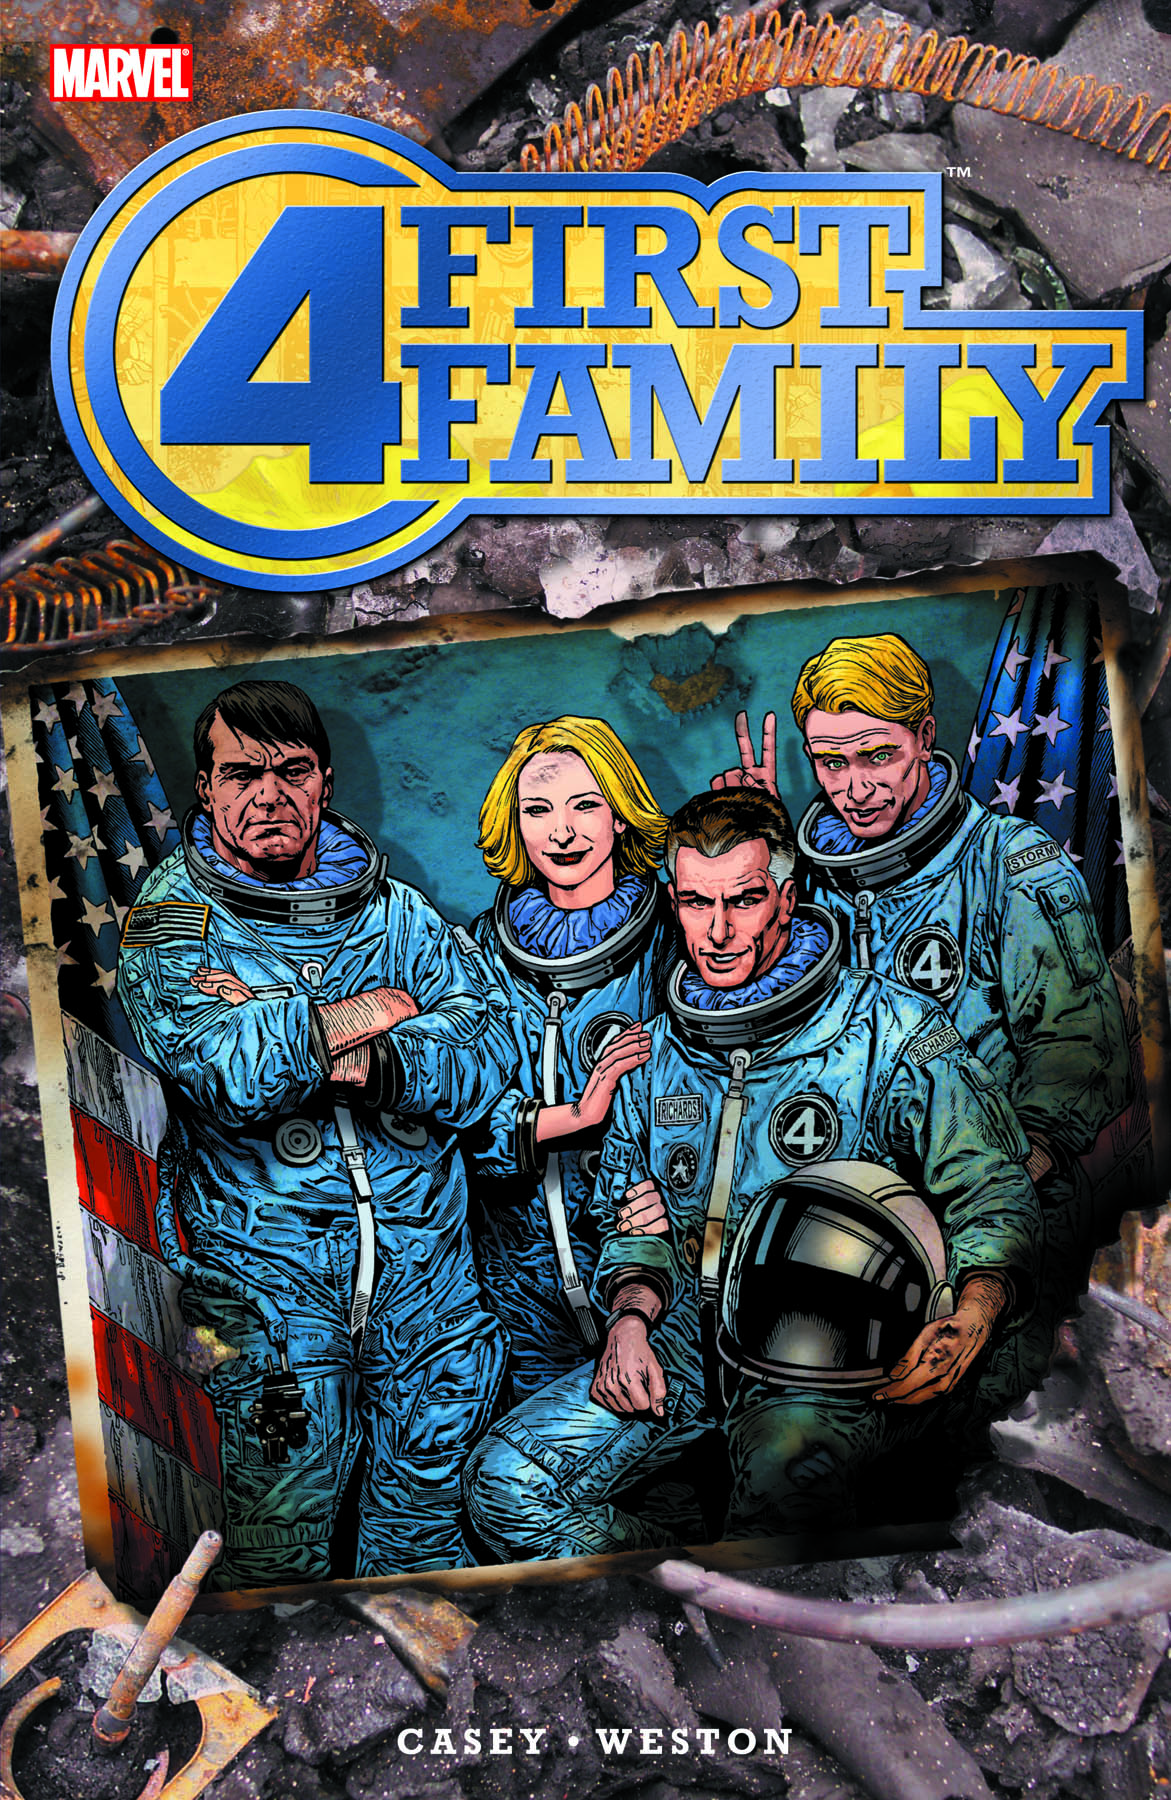 Fantastic Four: First Family (2006) #1